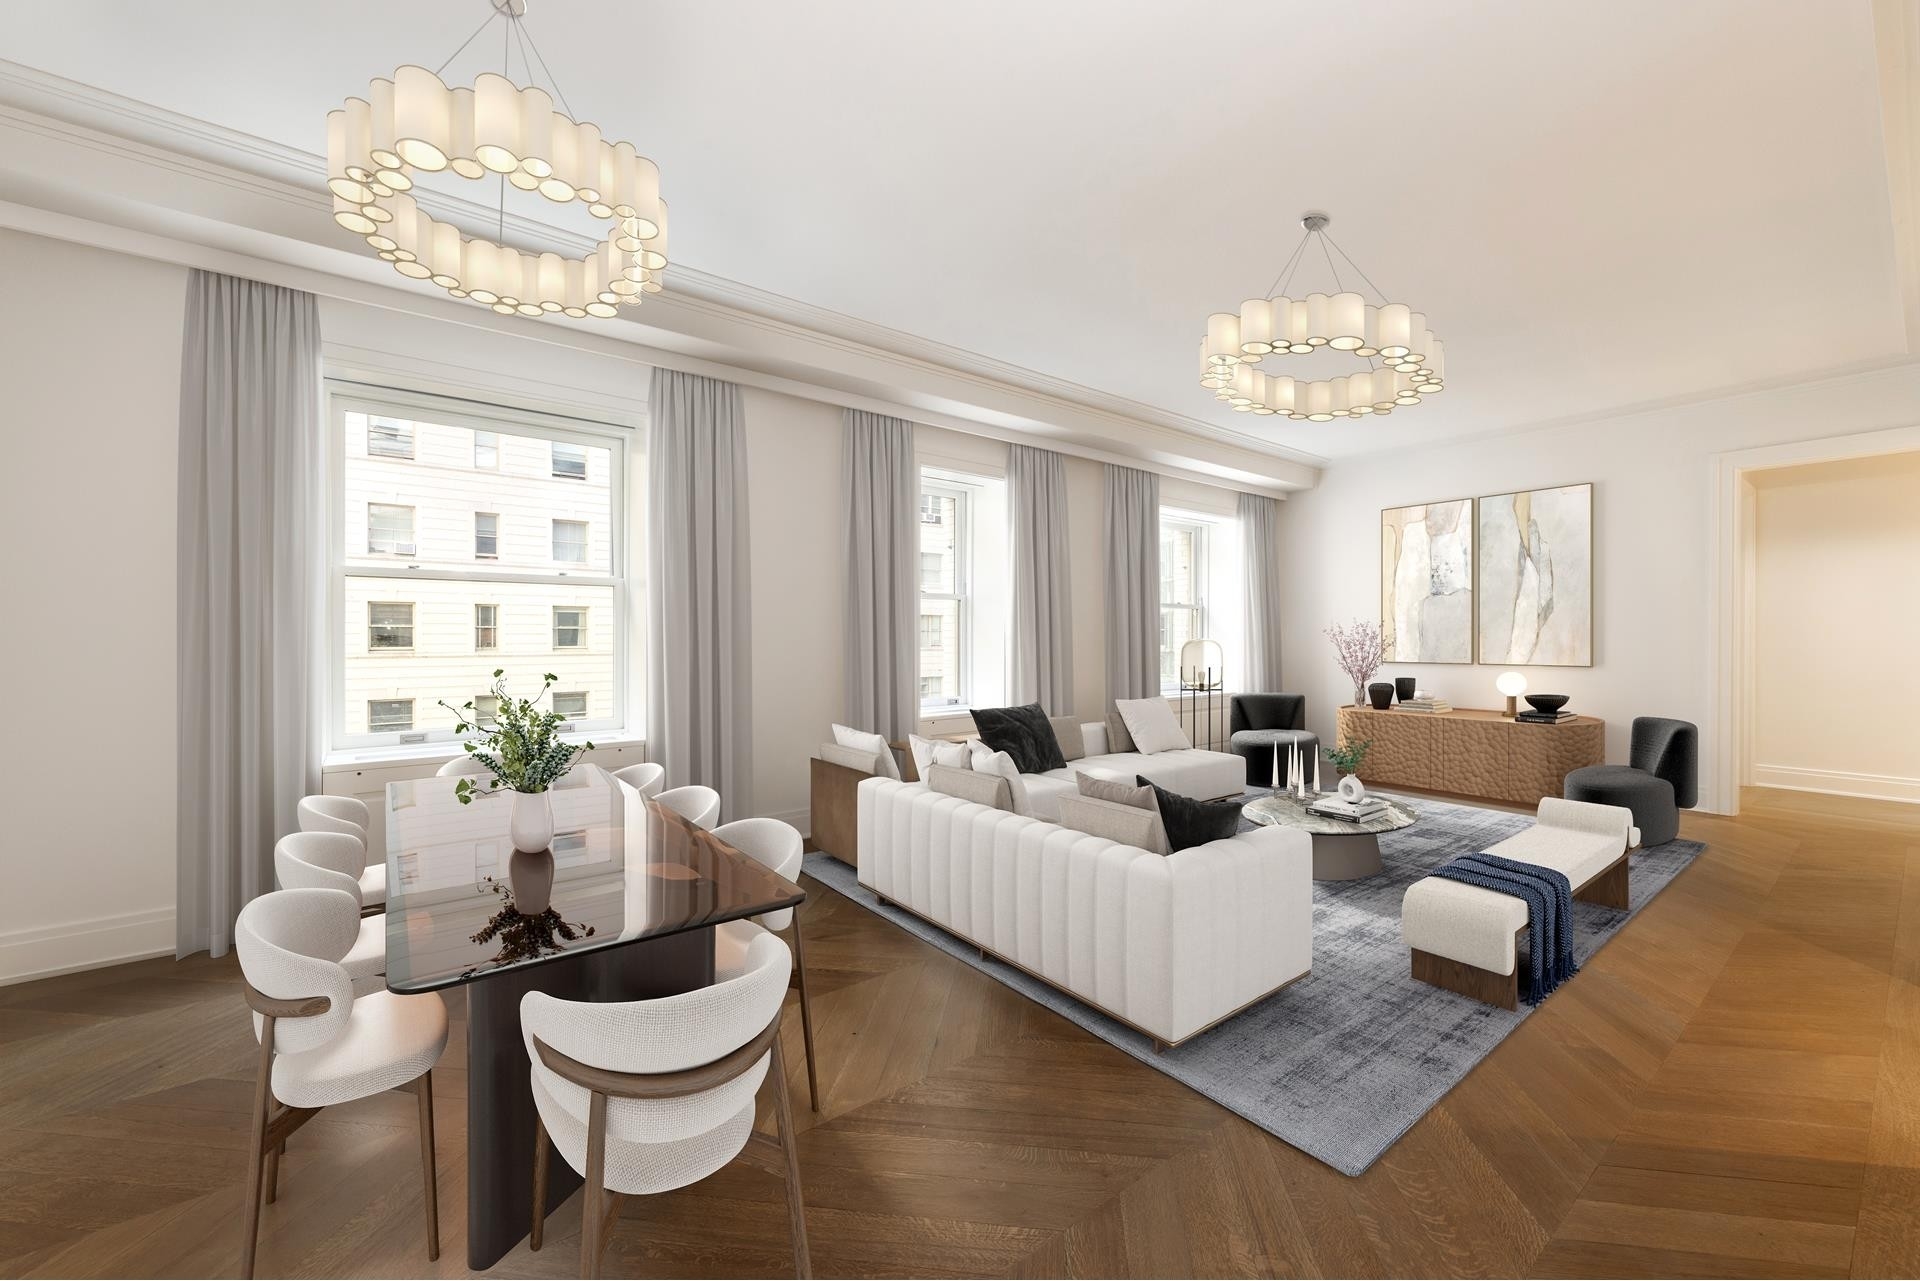 Condominium for Sale at The Belnord, 225 W 86TH ST, 1107 Upper West Side, New York, NY 10024